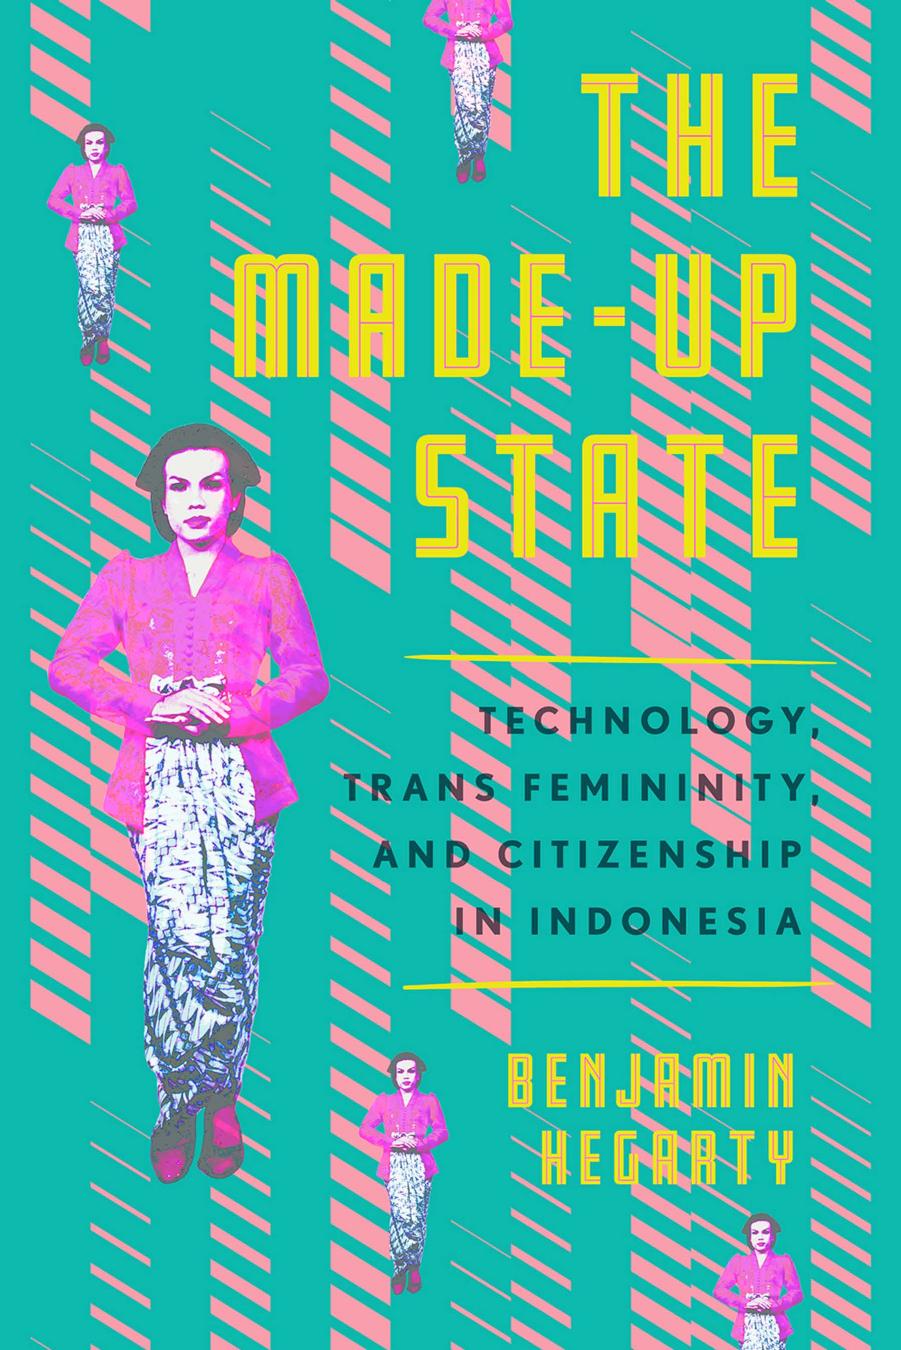 The Made-Up State: Technology, Trans Femininity, and Citizenship in Indonesia by Benjamin Hegarty